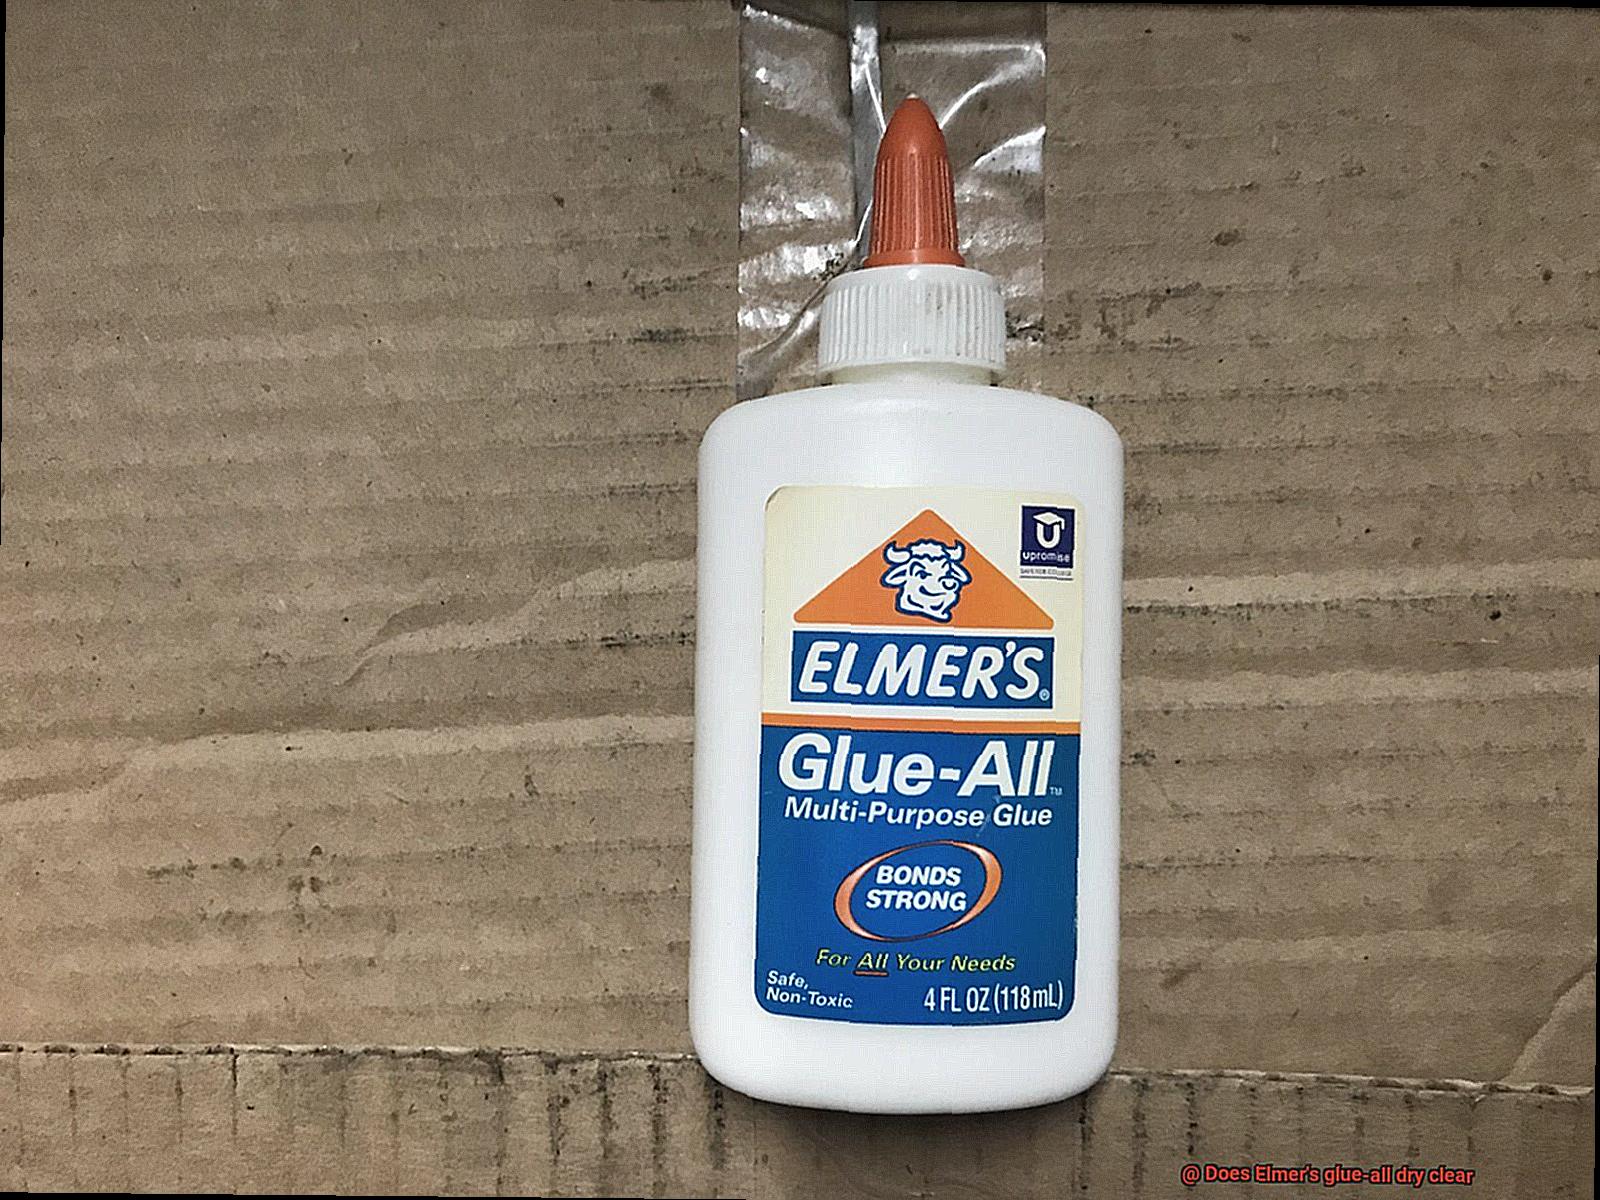 Does Elmer's glue-all dry clear-3